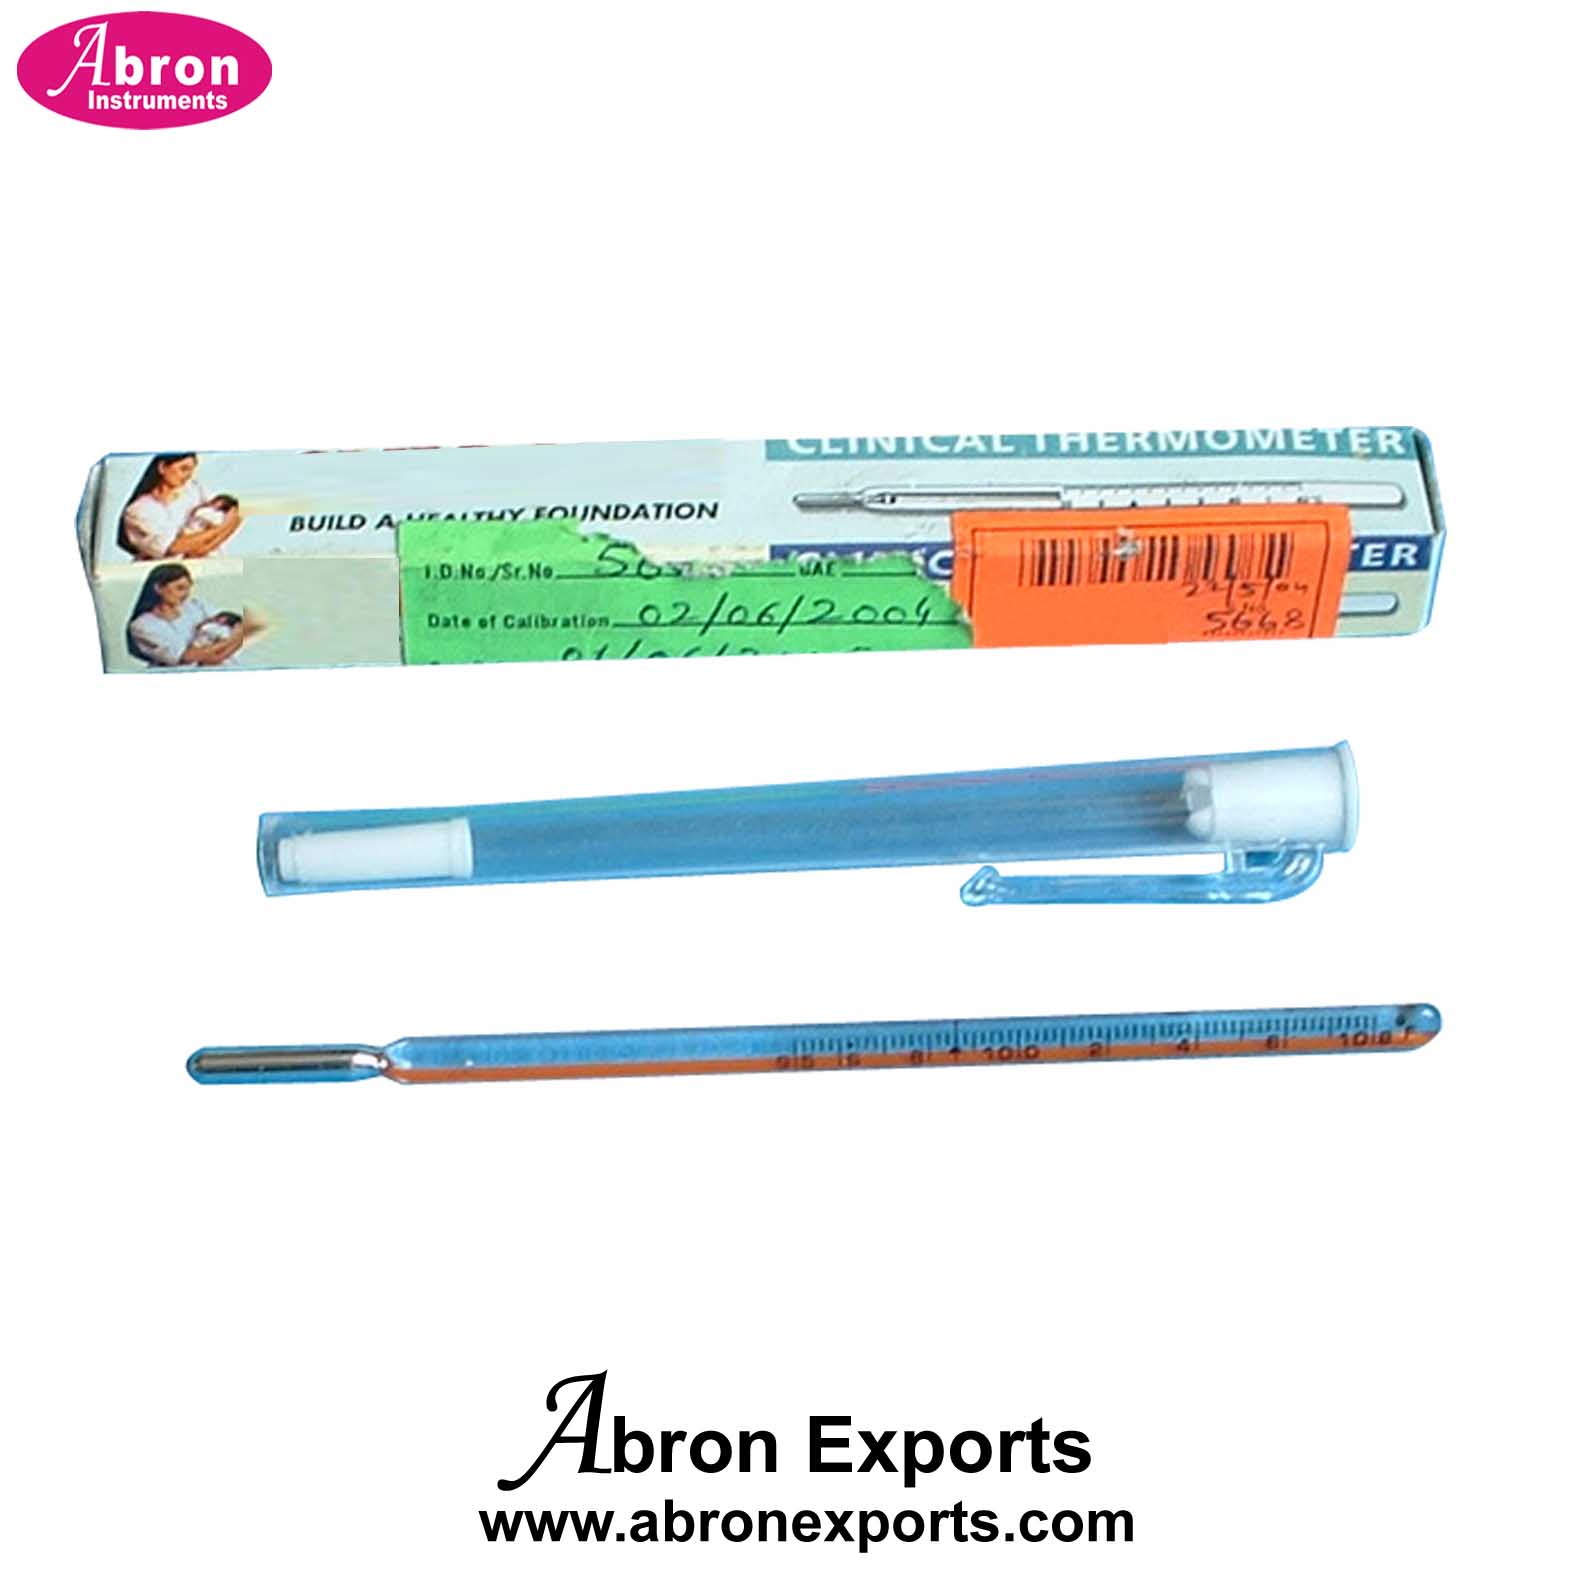 Clinical Thermometer Digital Mercury Type 100pc Abron ABM-2185D AB-84A 